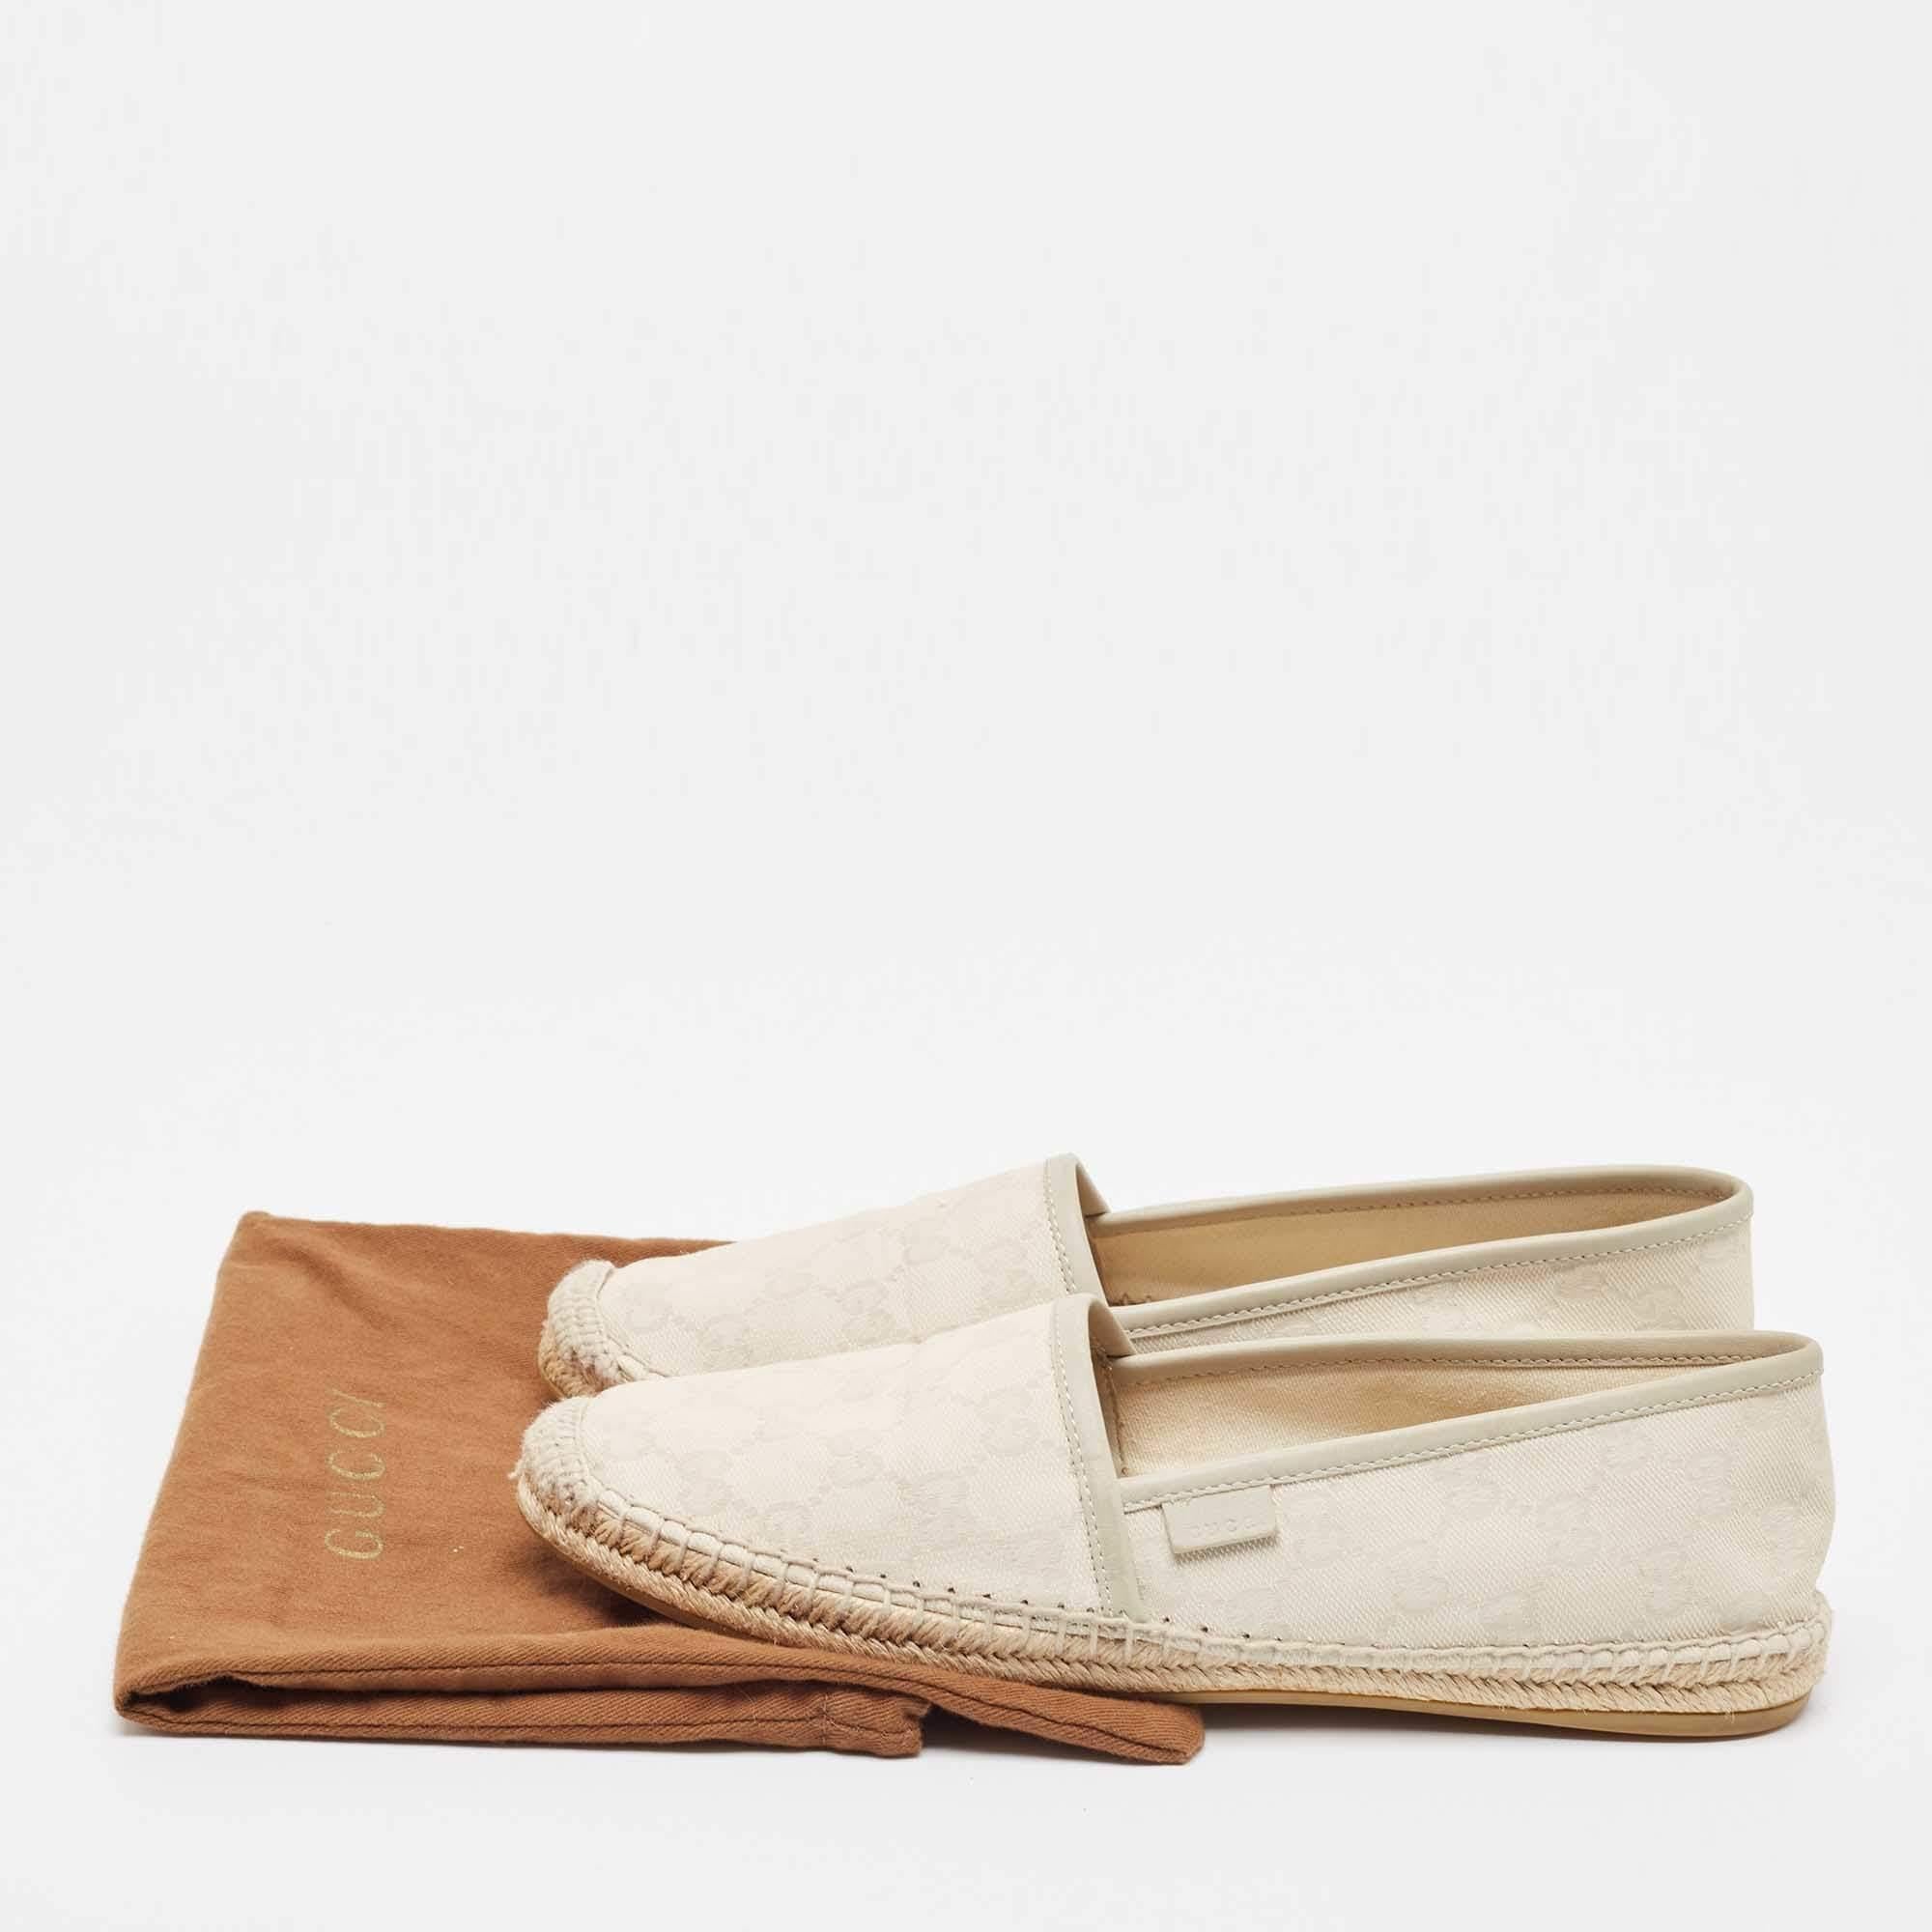 Gucci Cream/Grey GG Canvas and Leather Espadrilles Flats Size 38.5 For Sale 5